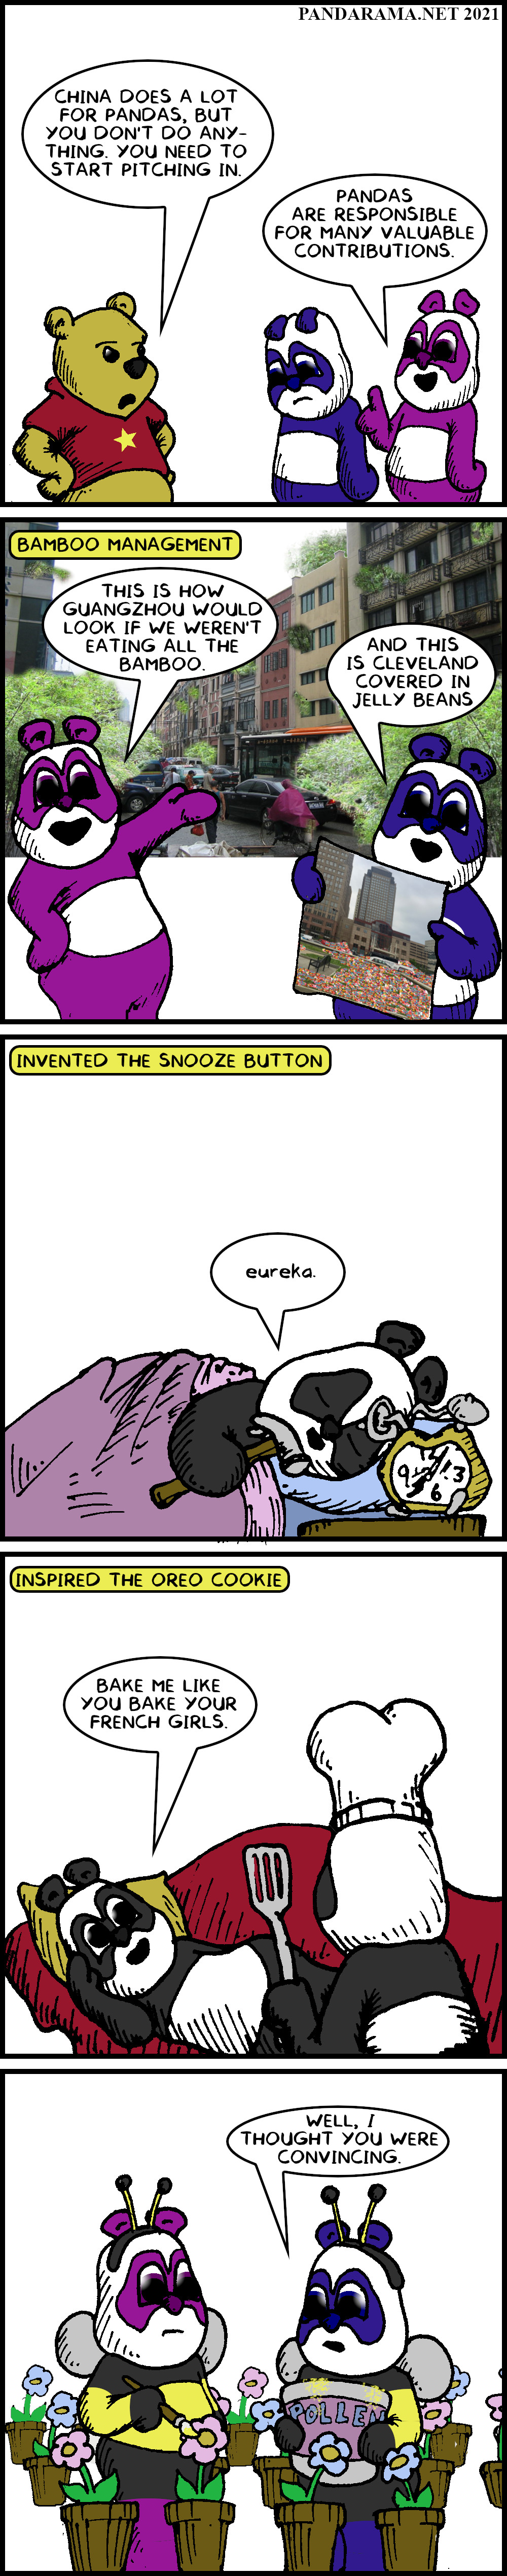 webcomic. pandas invented the snooze button and inspired the oreo cookie. CCP is not impressed and makes them work like bees.